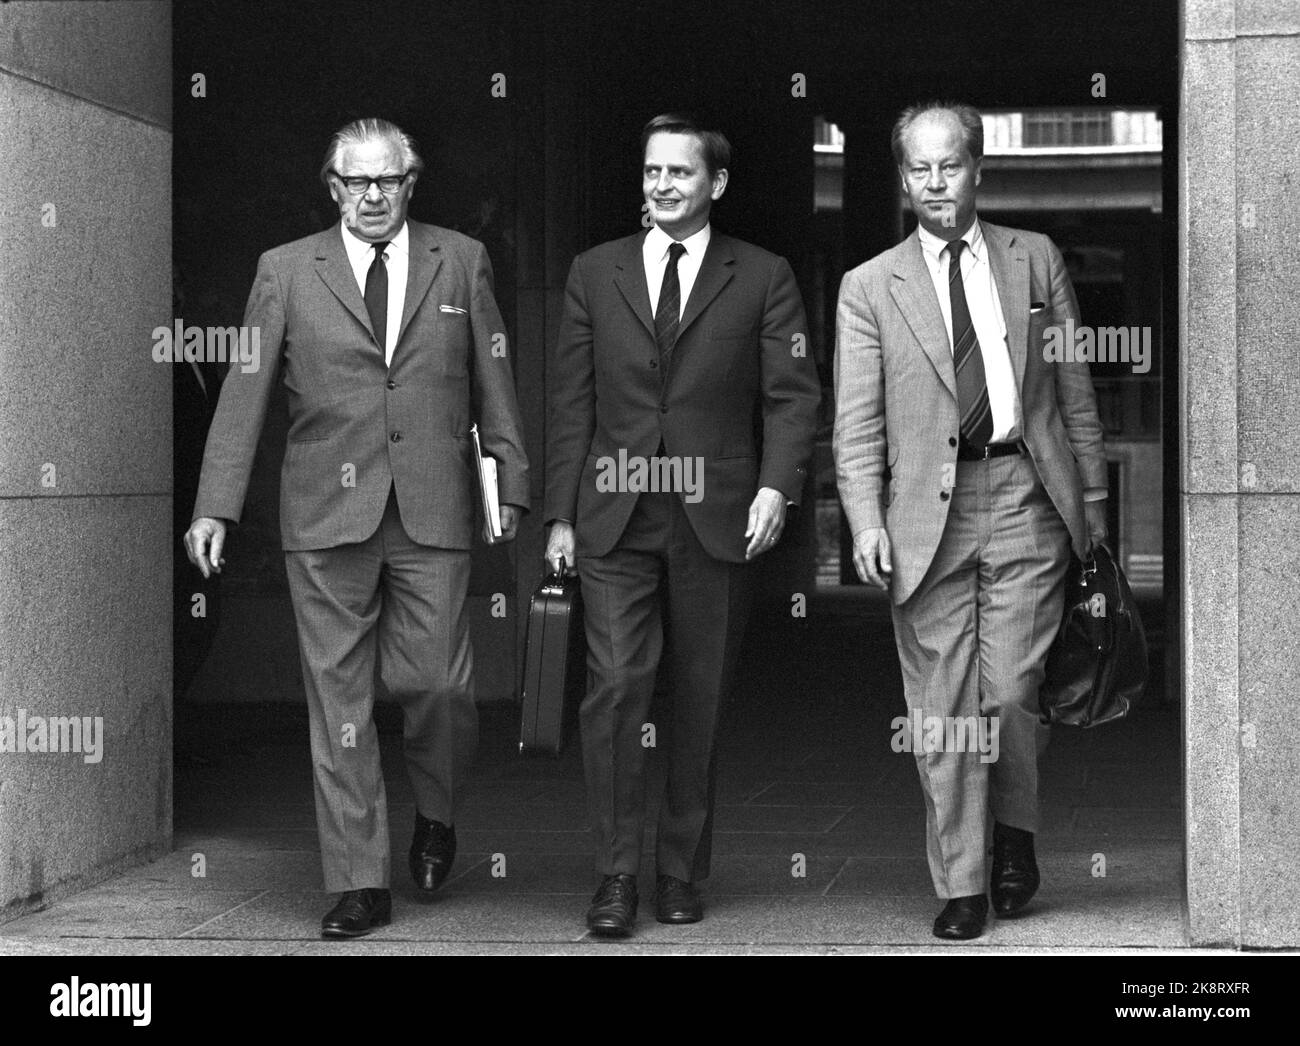 Stockholm 27081970 Palme strikes. Finance Minister Gunnar Sträng, Prime Minister Olof Palme in the middle and Industry Minister Krister Wickmann on his way to the Riksdag. Prime Minister Olof Palme, made a dramatic play on Swedish business by announcing a price stop. Palme has the opinion with it, and it goes against elections on September 20. Photo: Per Ervik / Current / NTB Stock Photo